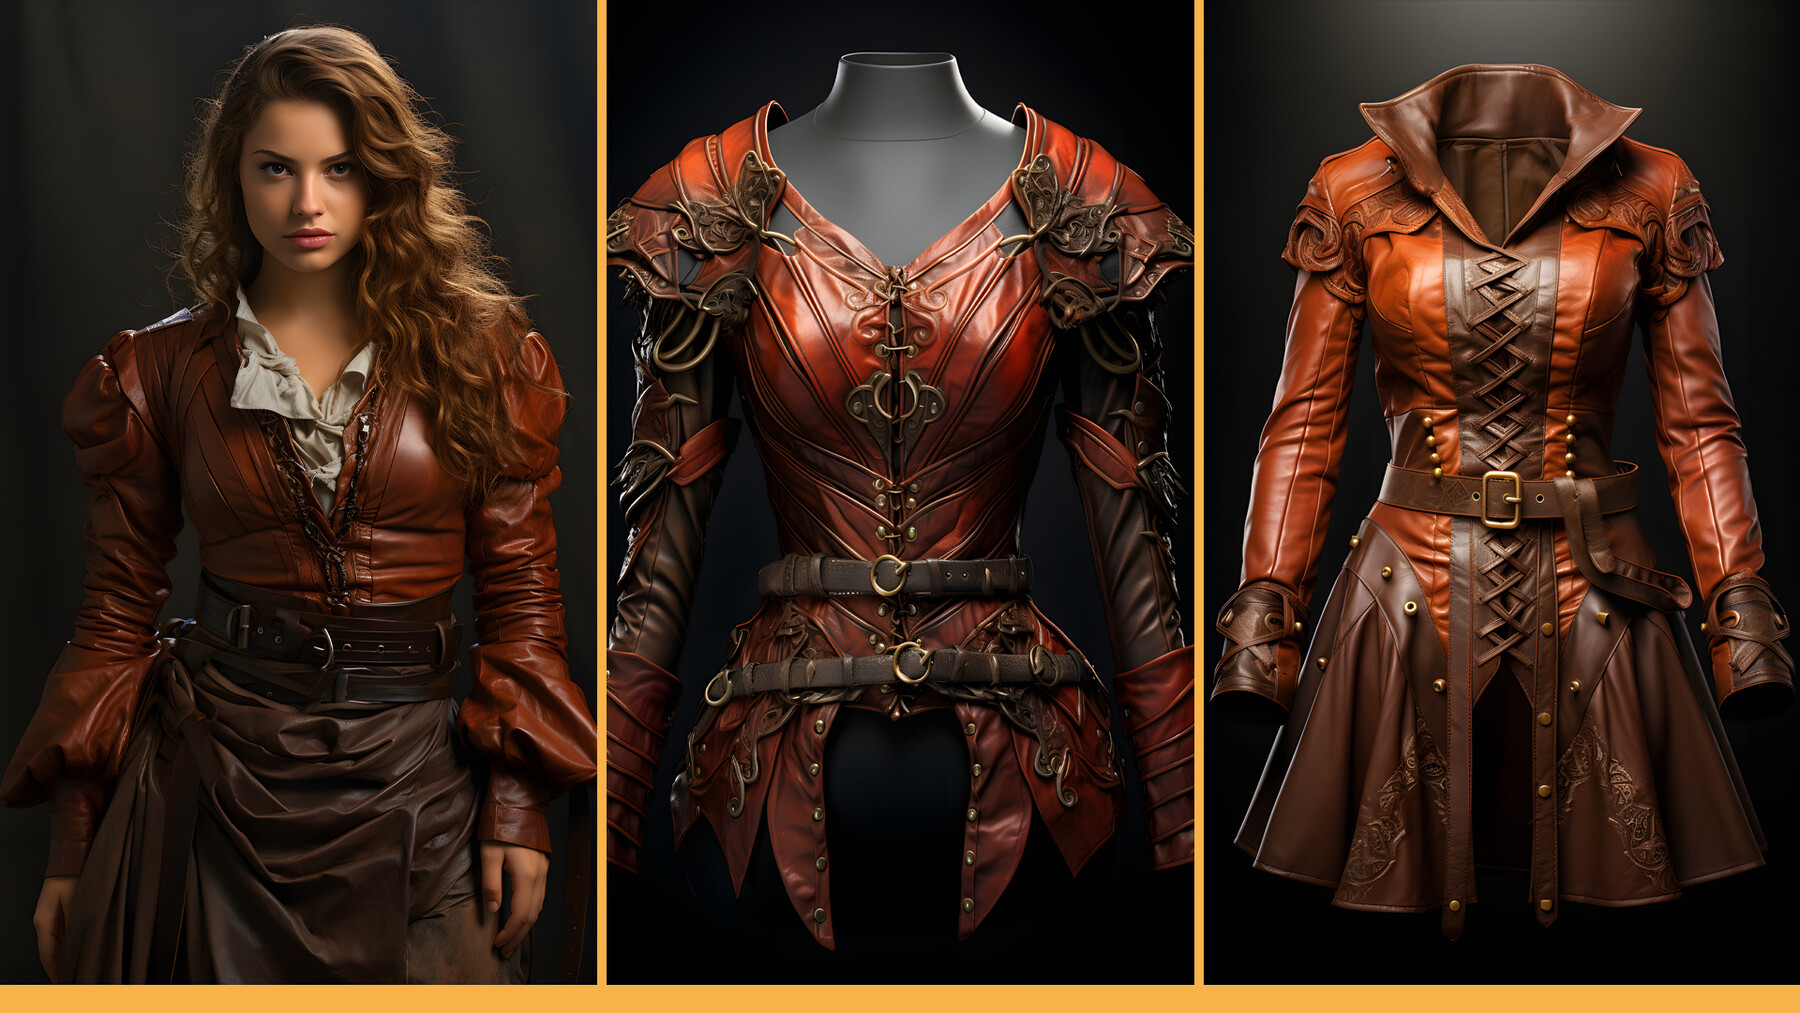 ArtStation - 303 Women's Medieval Leather Clothing VOL17